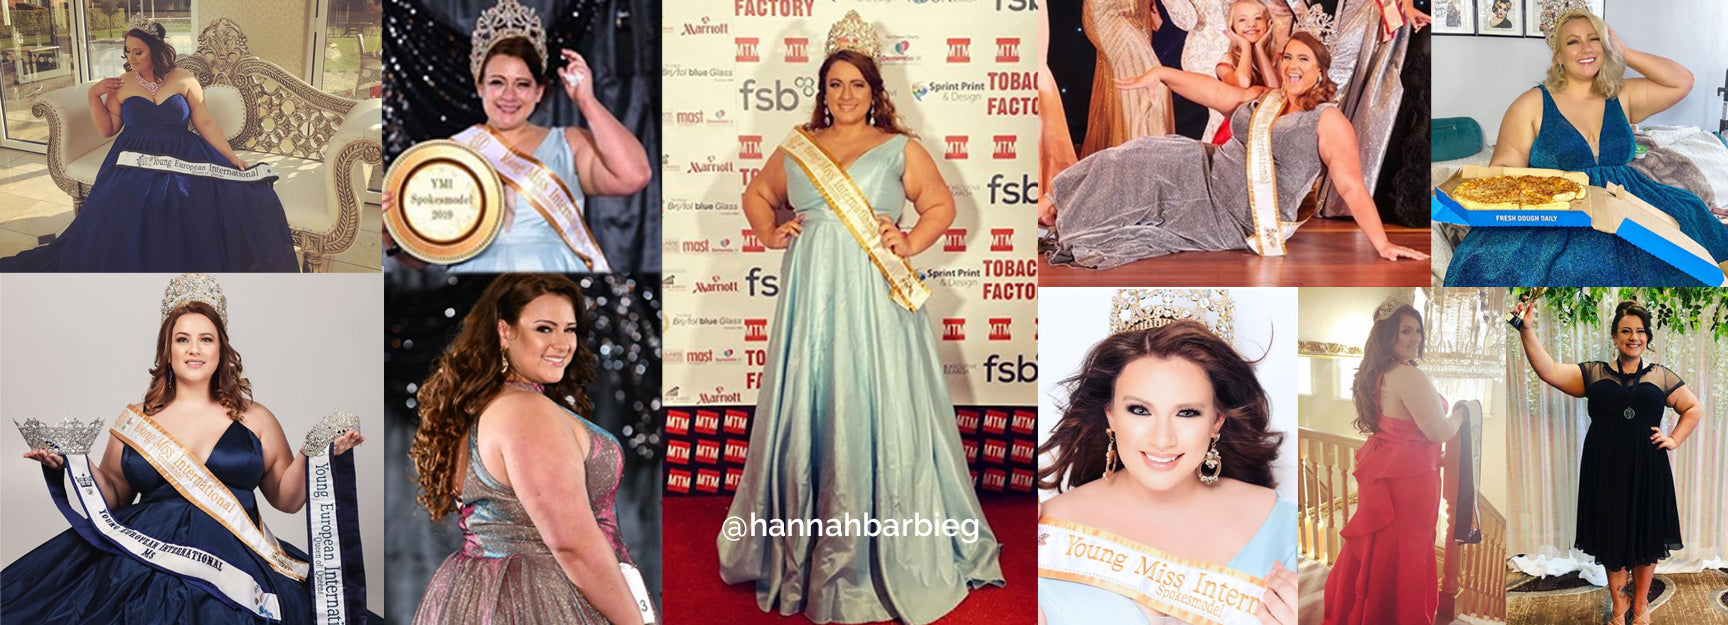 @hannahbarbieg looking fabulous as Young Miss International 2020 wearing lots of Sydney's Closet and Tease Prom gowns